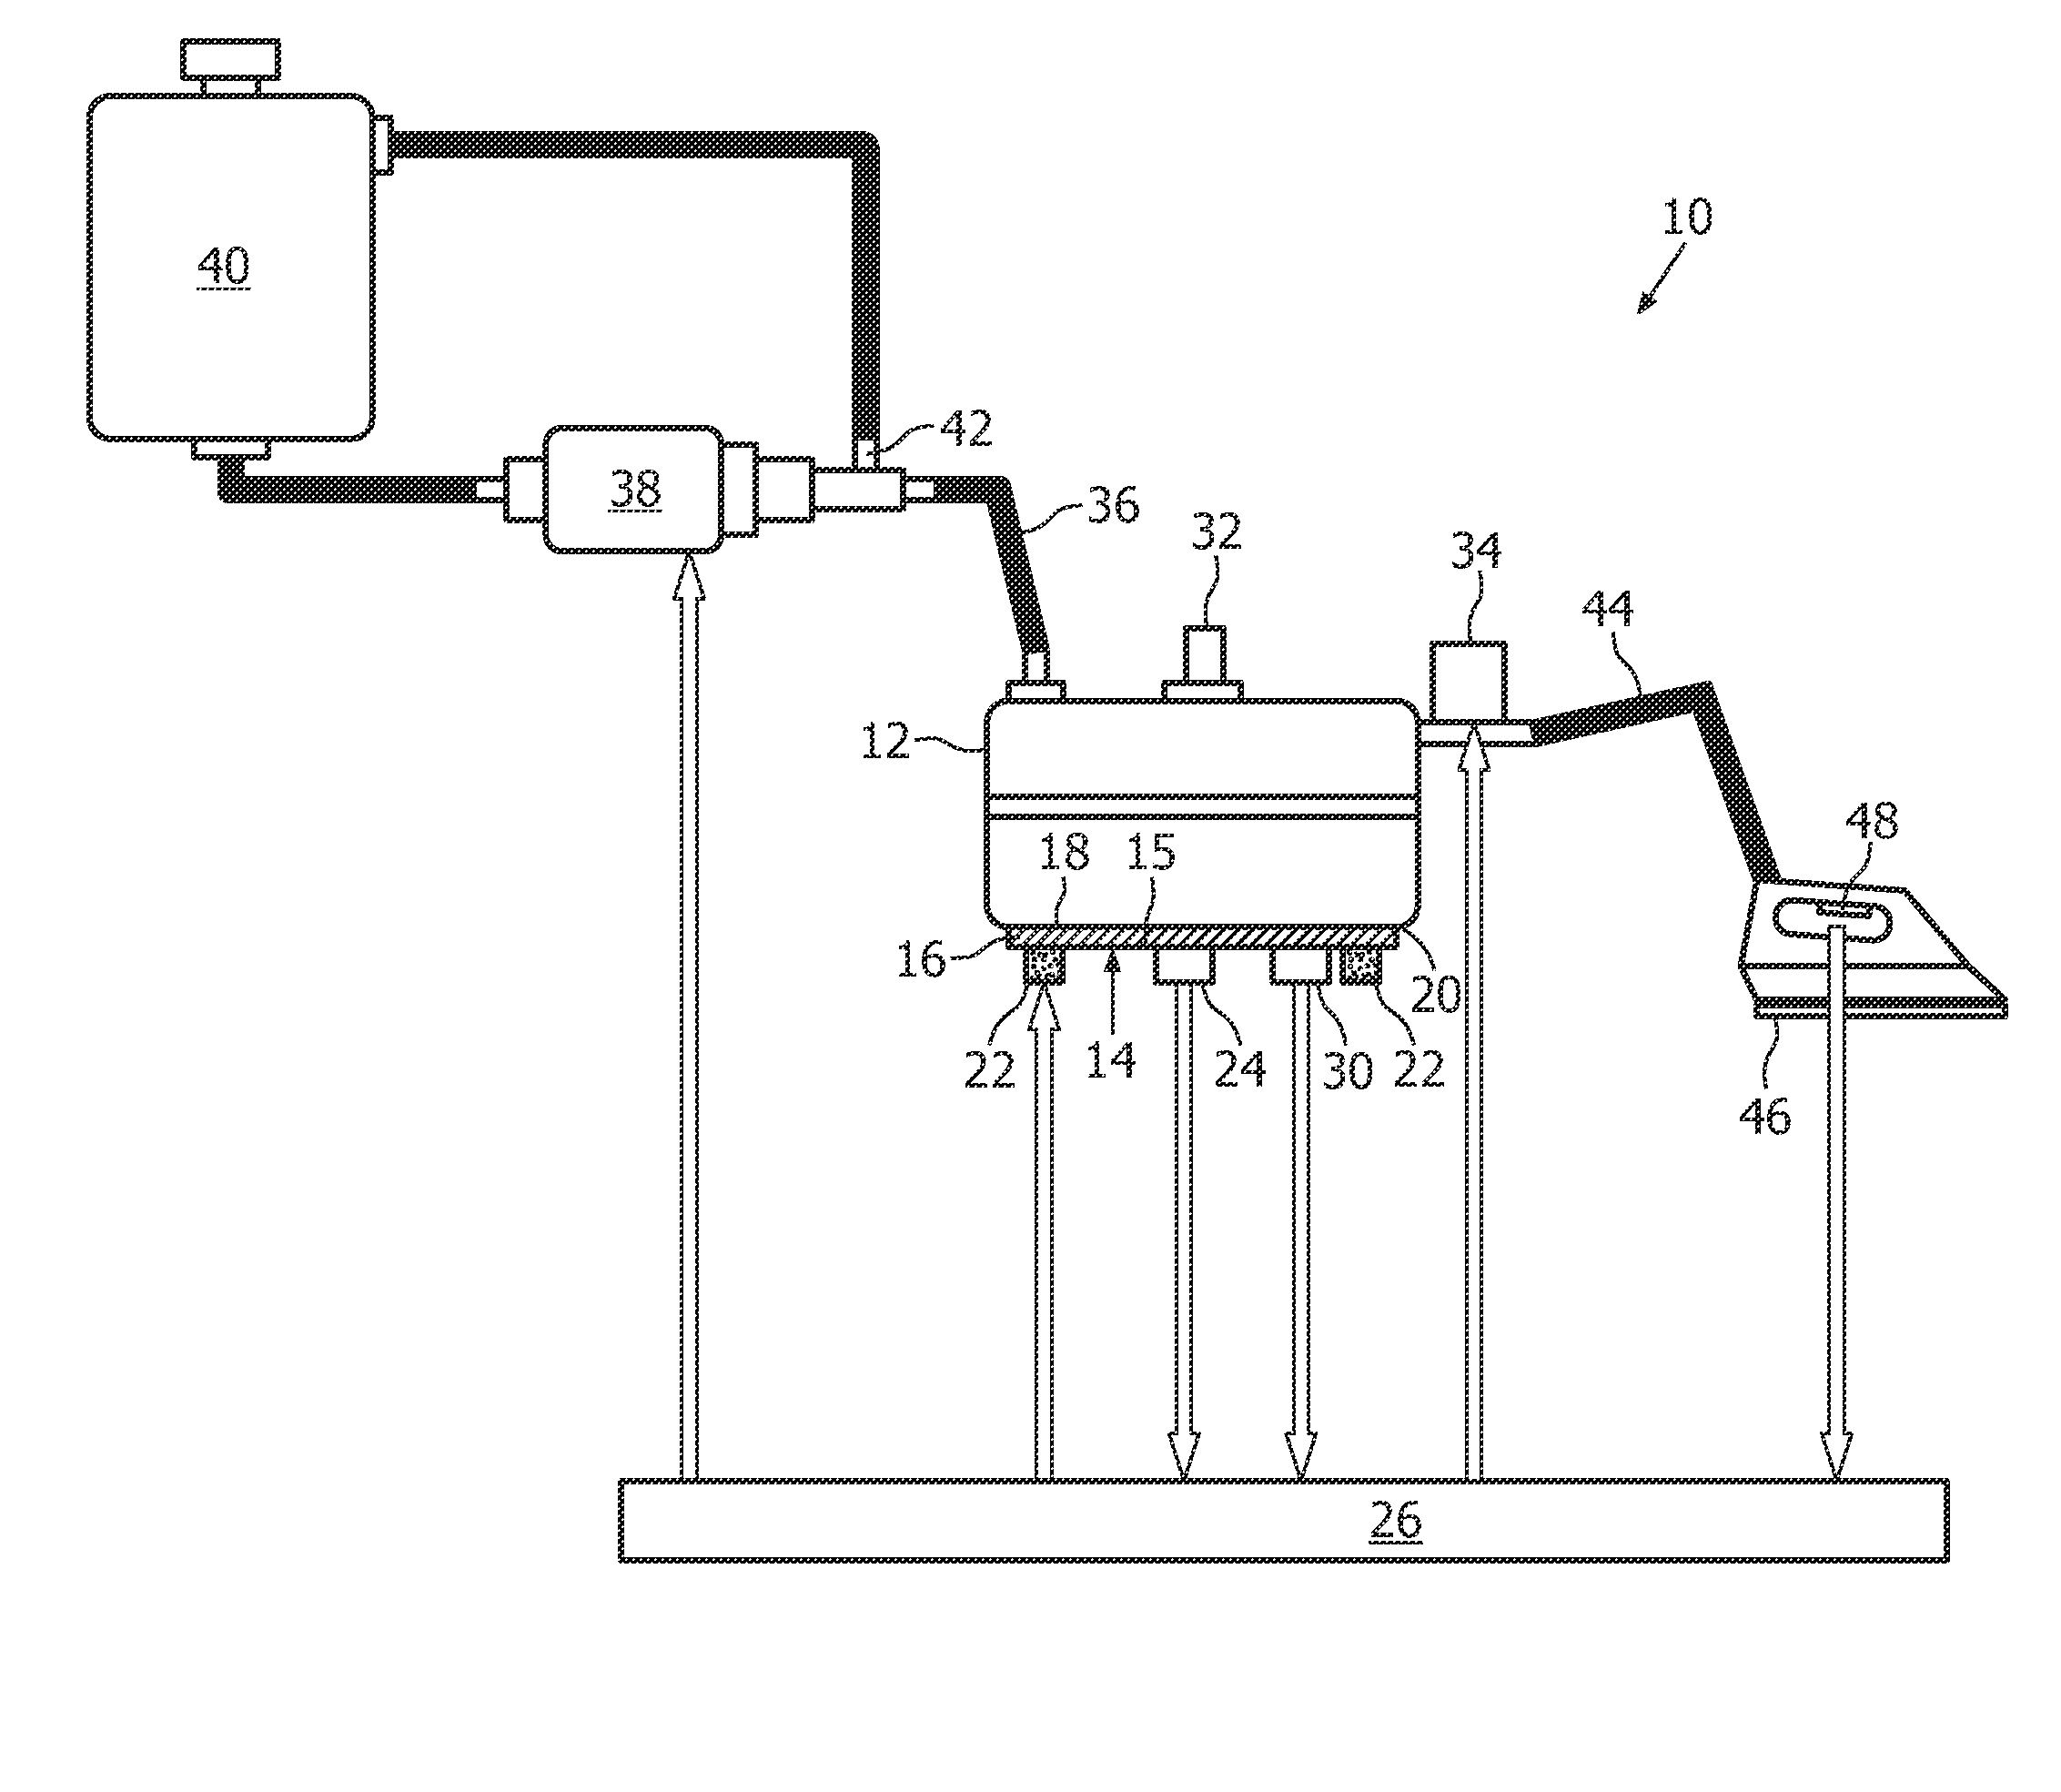 Apparatus and method for generating steam